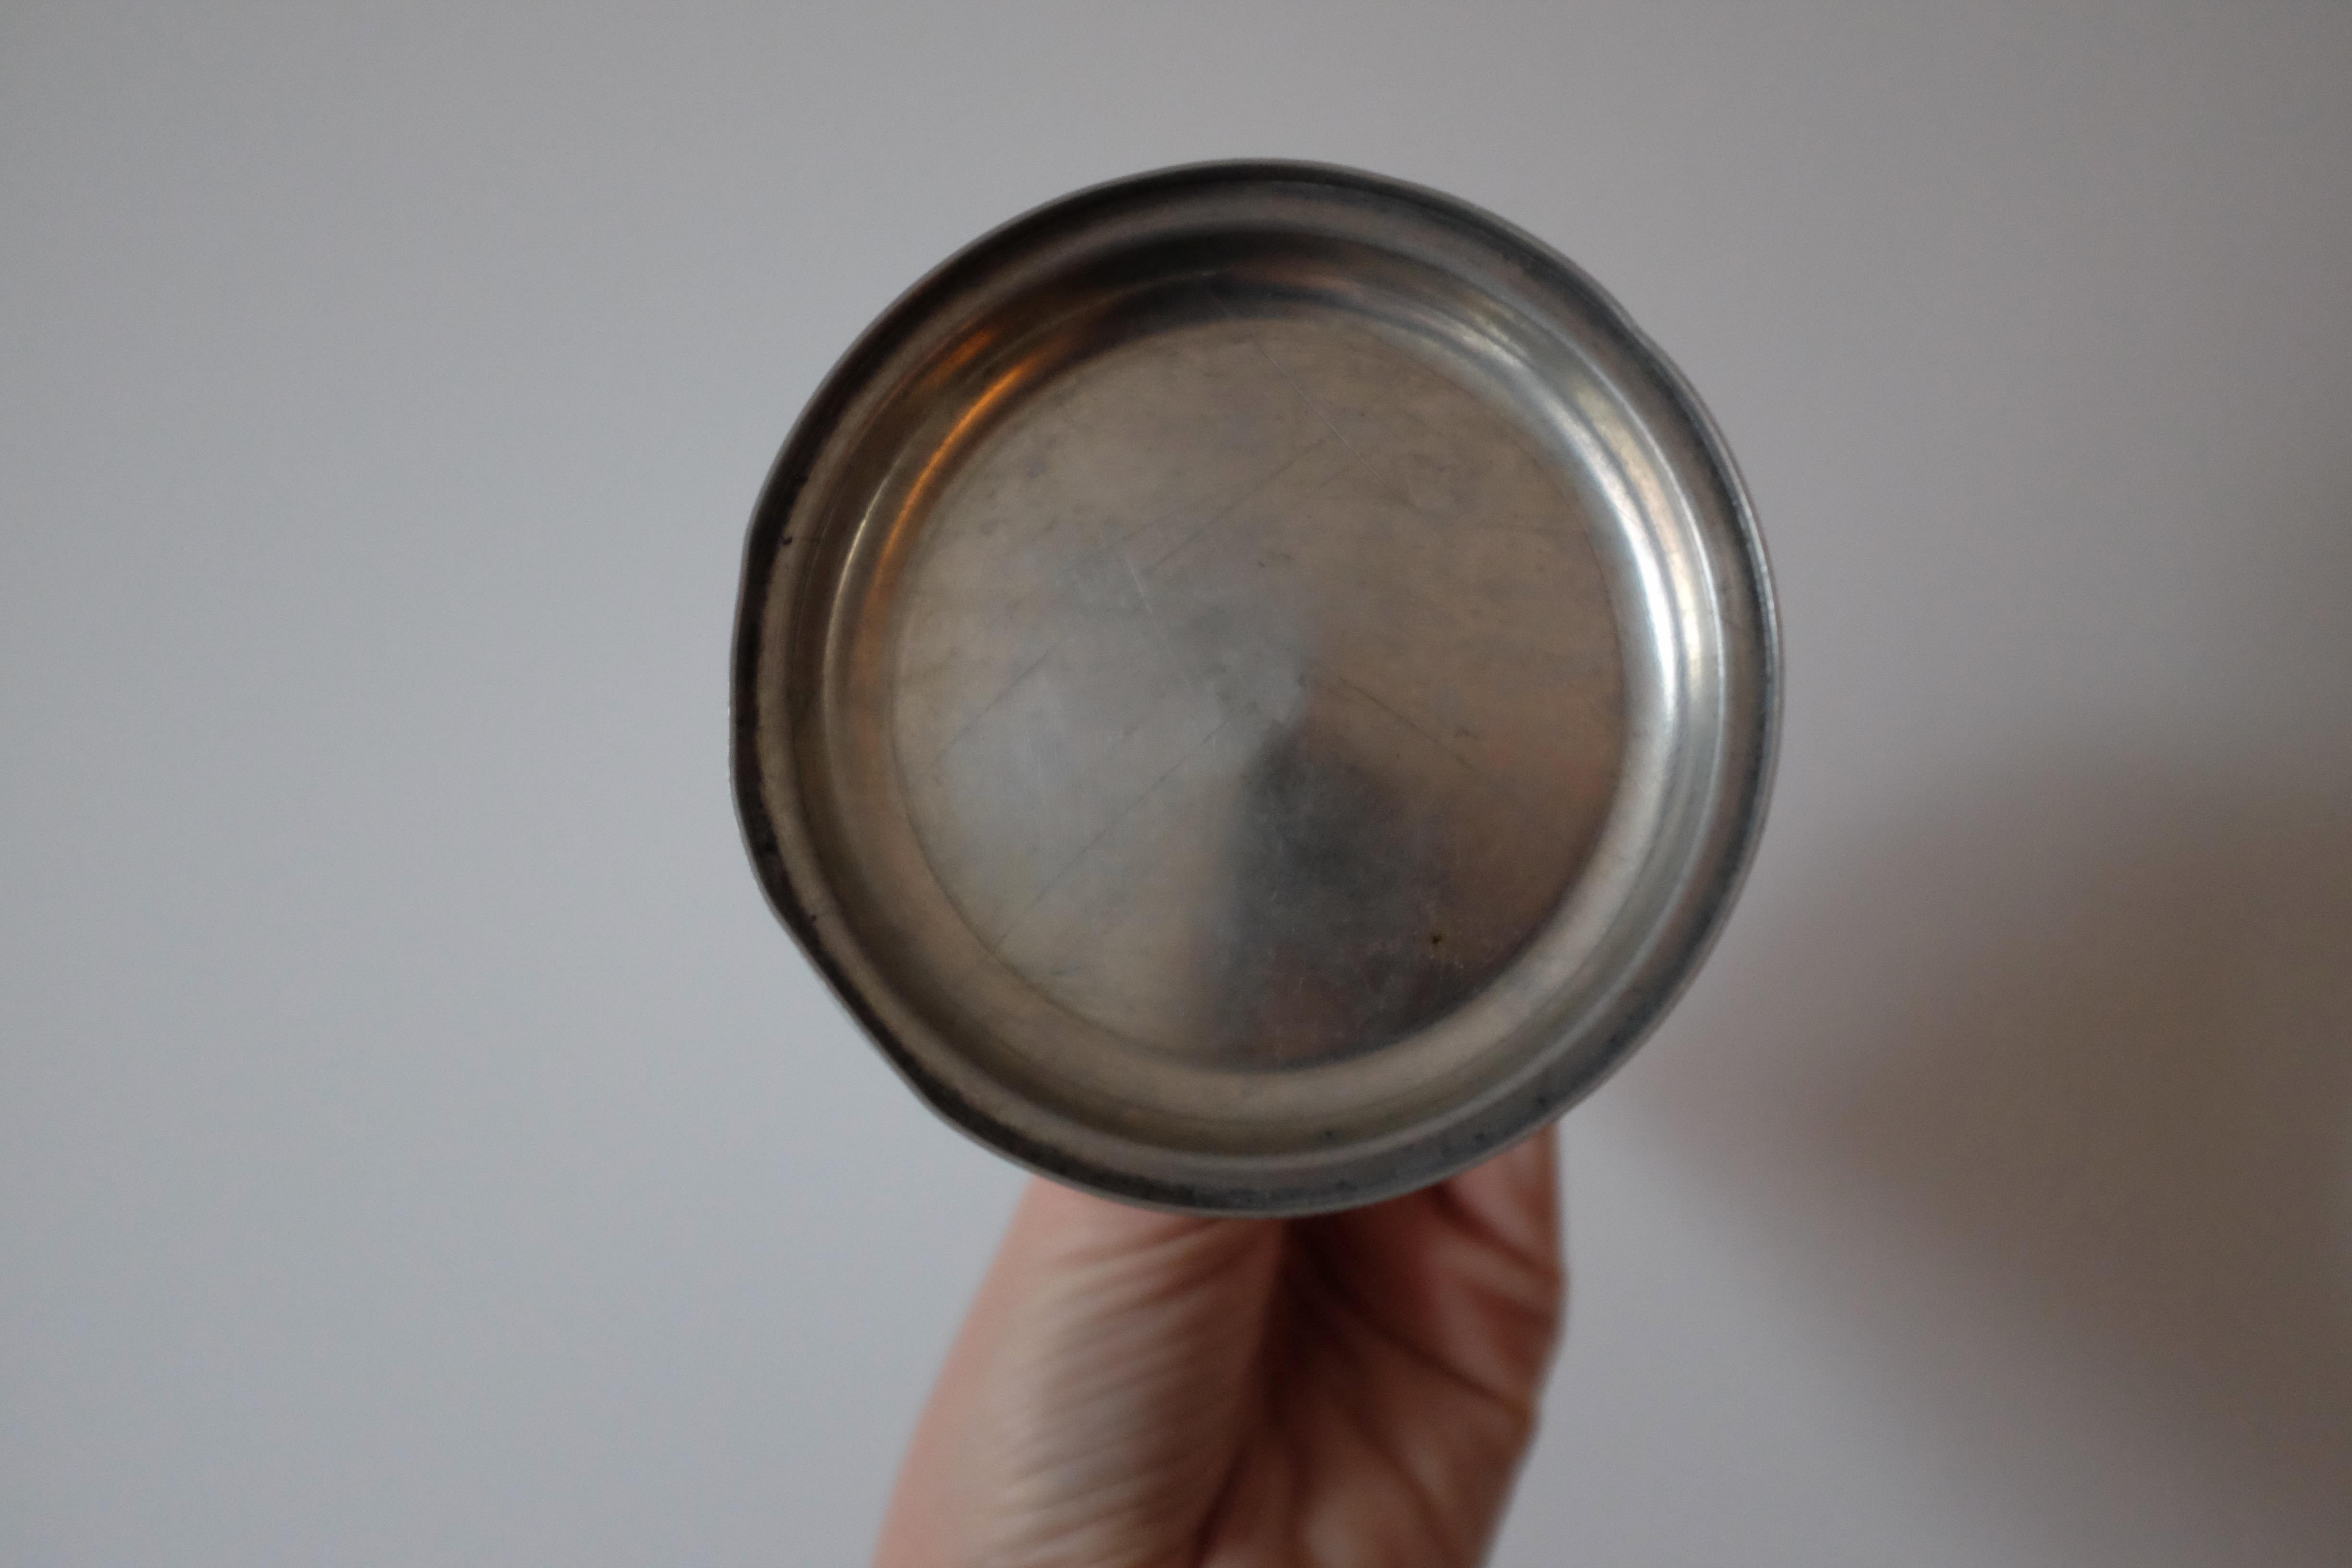 1932 Pewter Jar from C.G. Hallberg In Good Condition For Sale In Brooklyn, NY